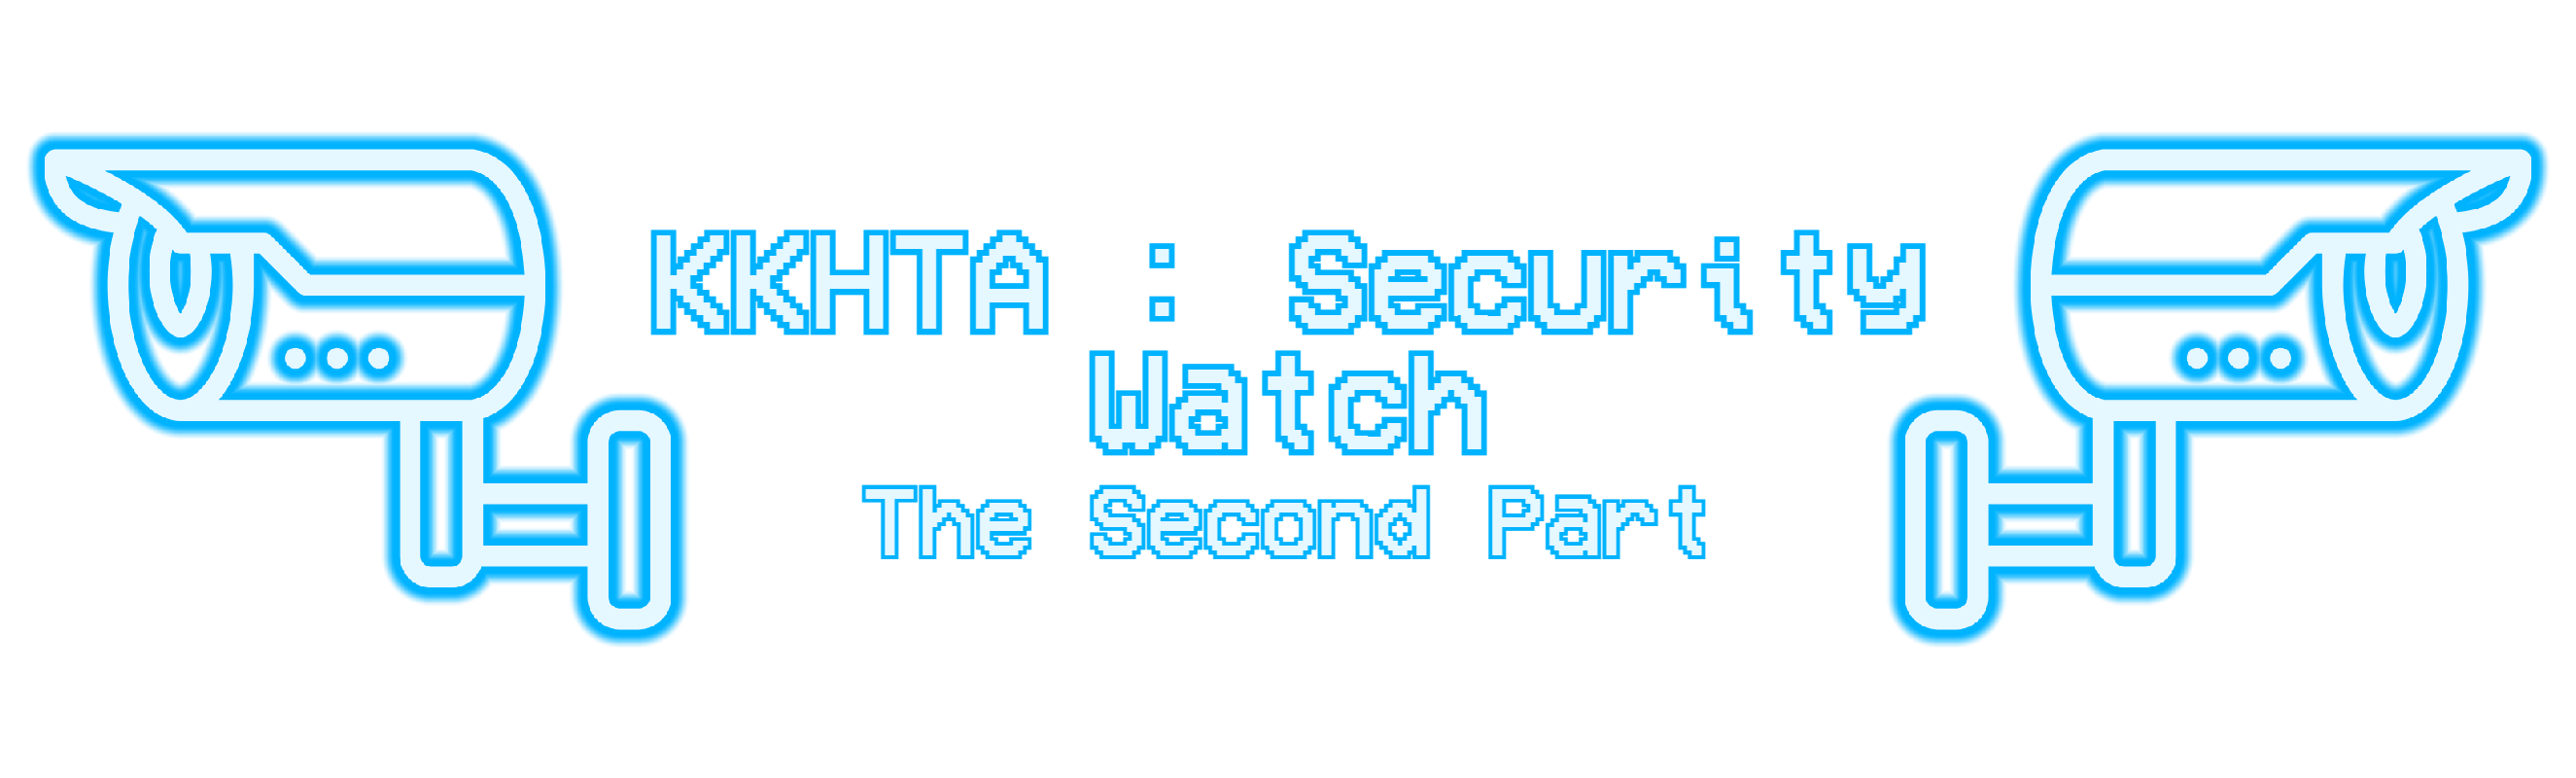 KKHTA : Security Watch - The Second Part